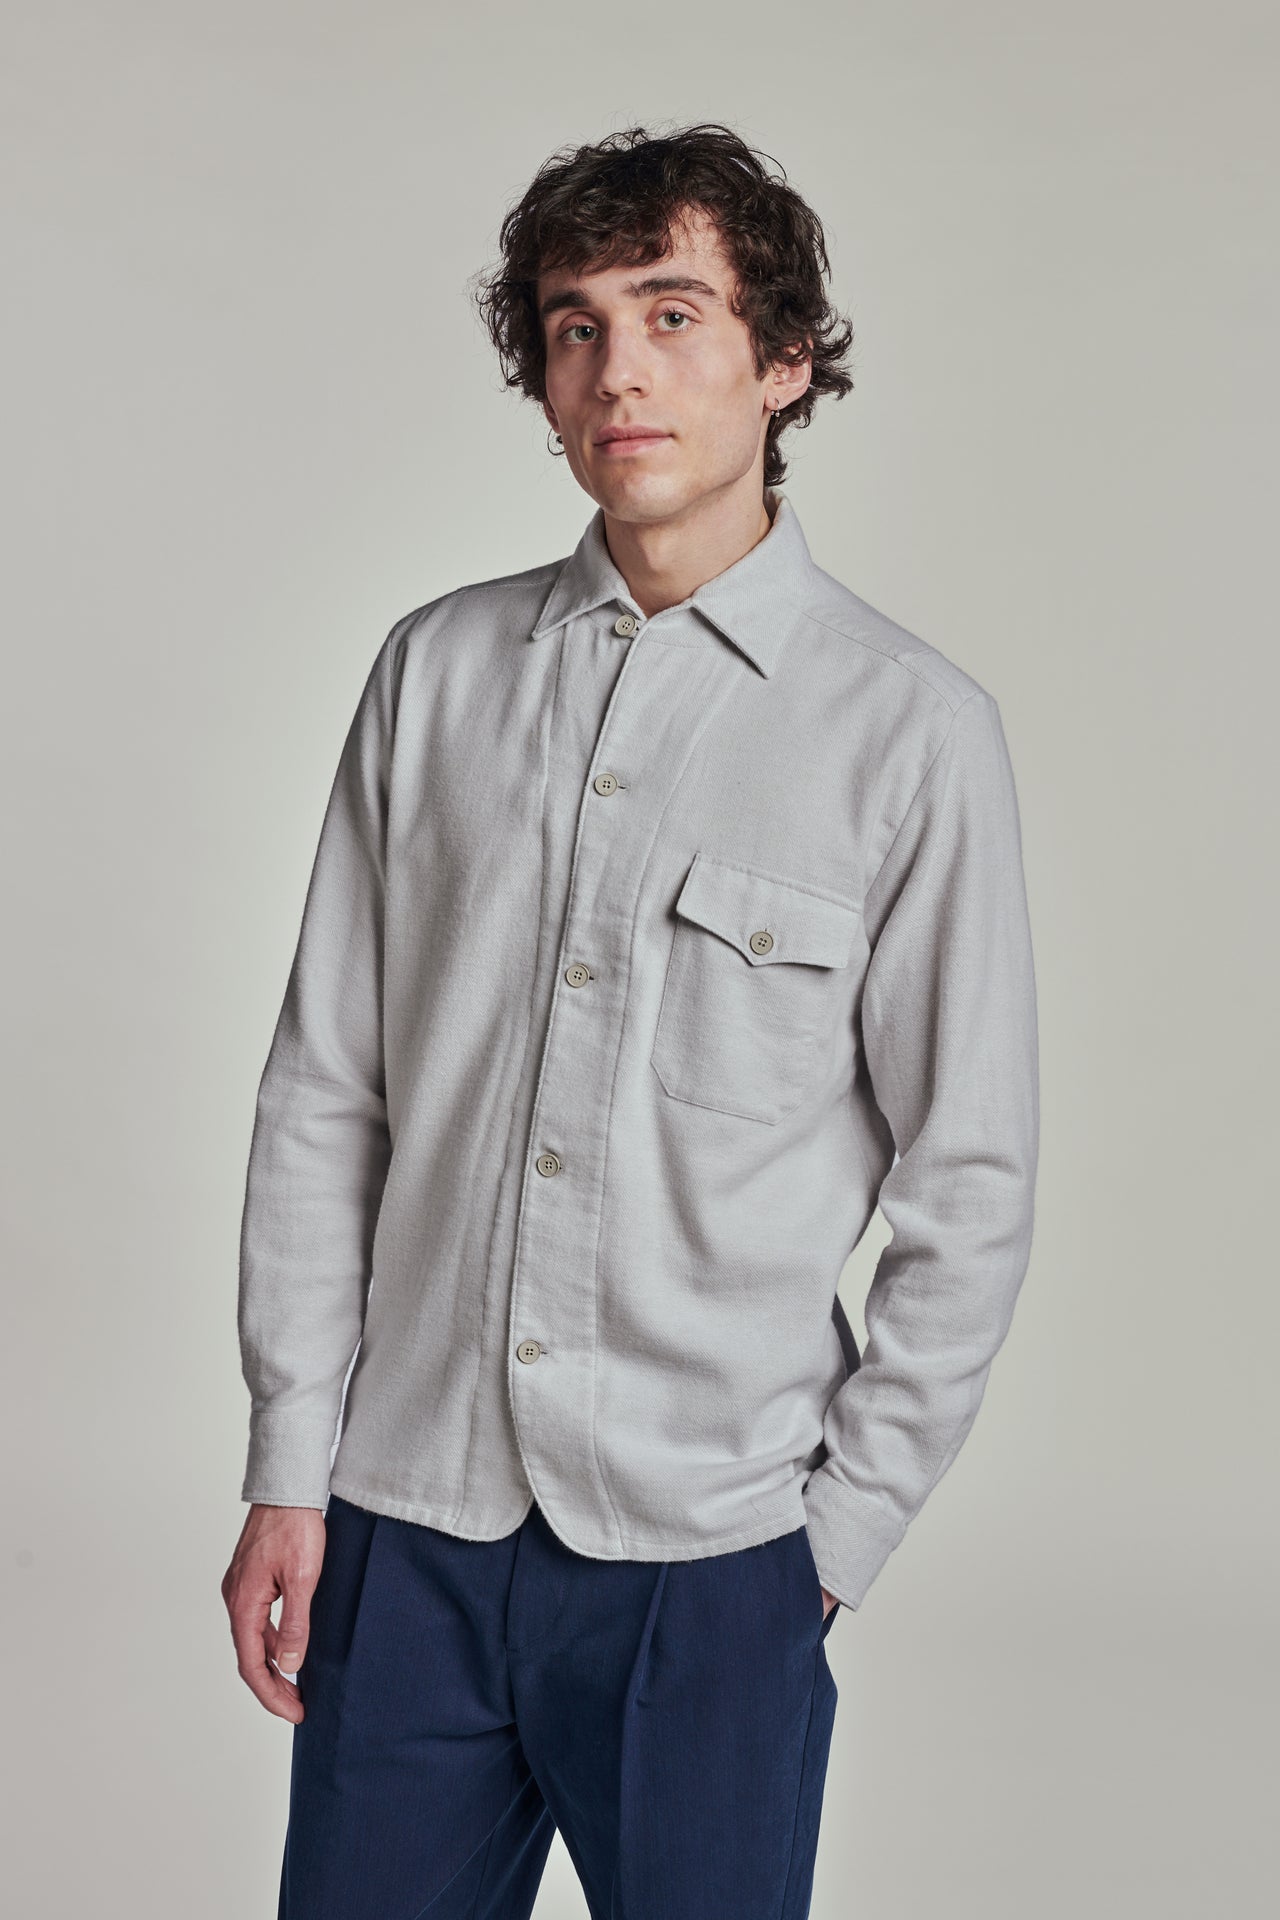 Relaxed Camp Collar Overshirt in a Light Grey Portuguese Cotton Flannel